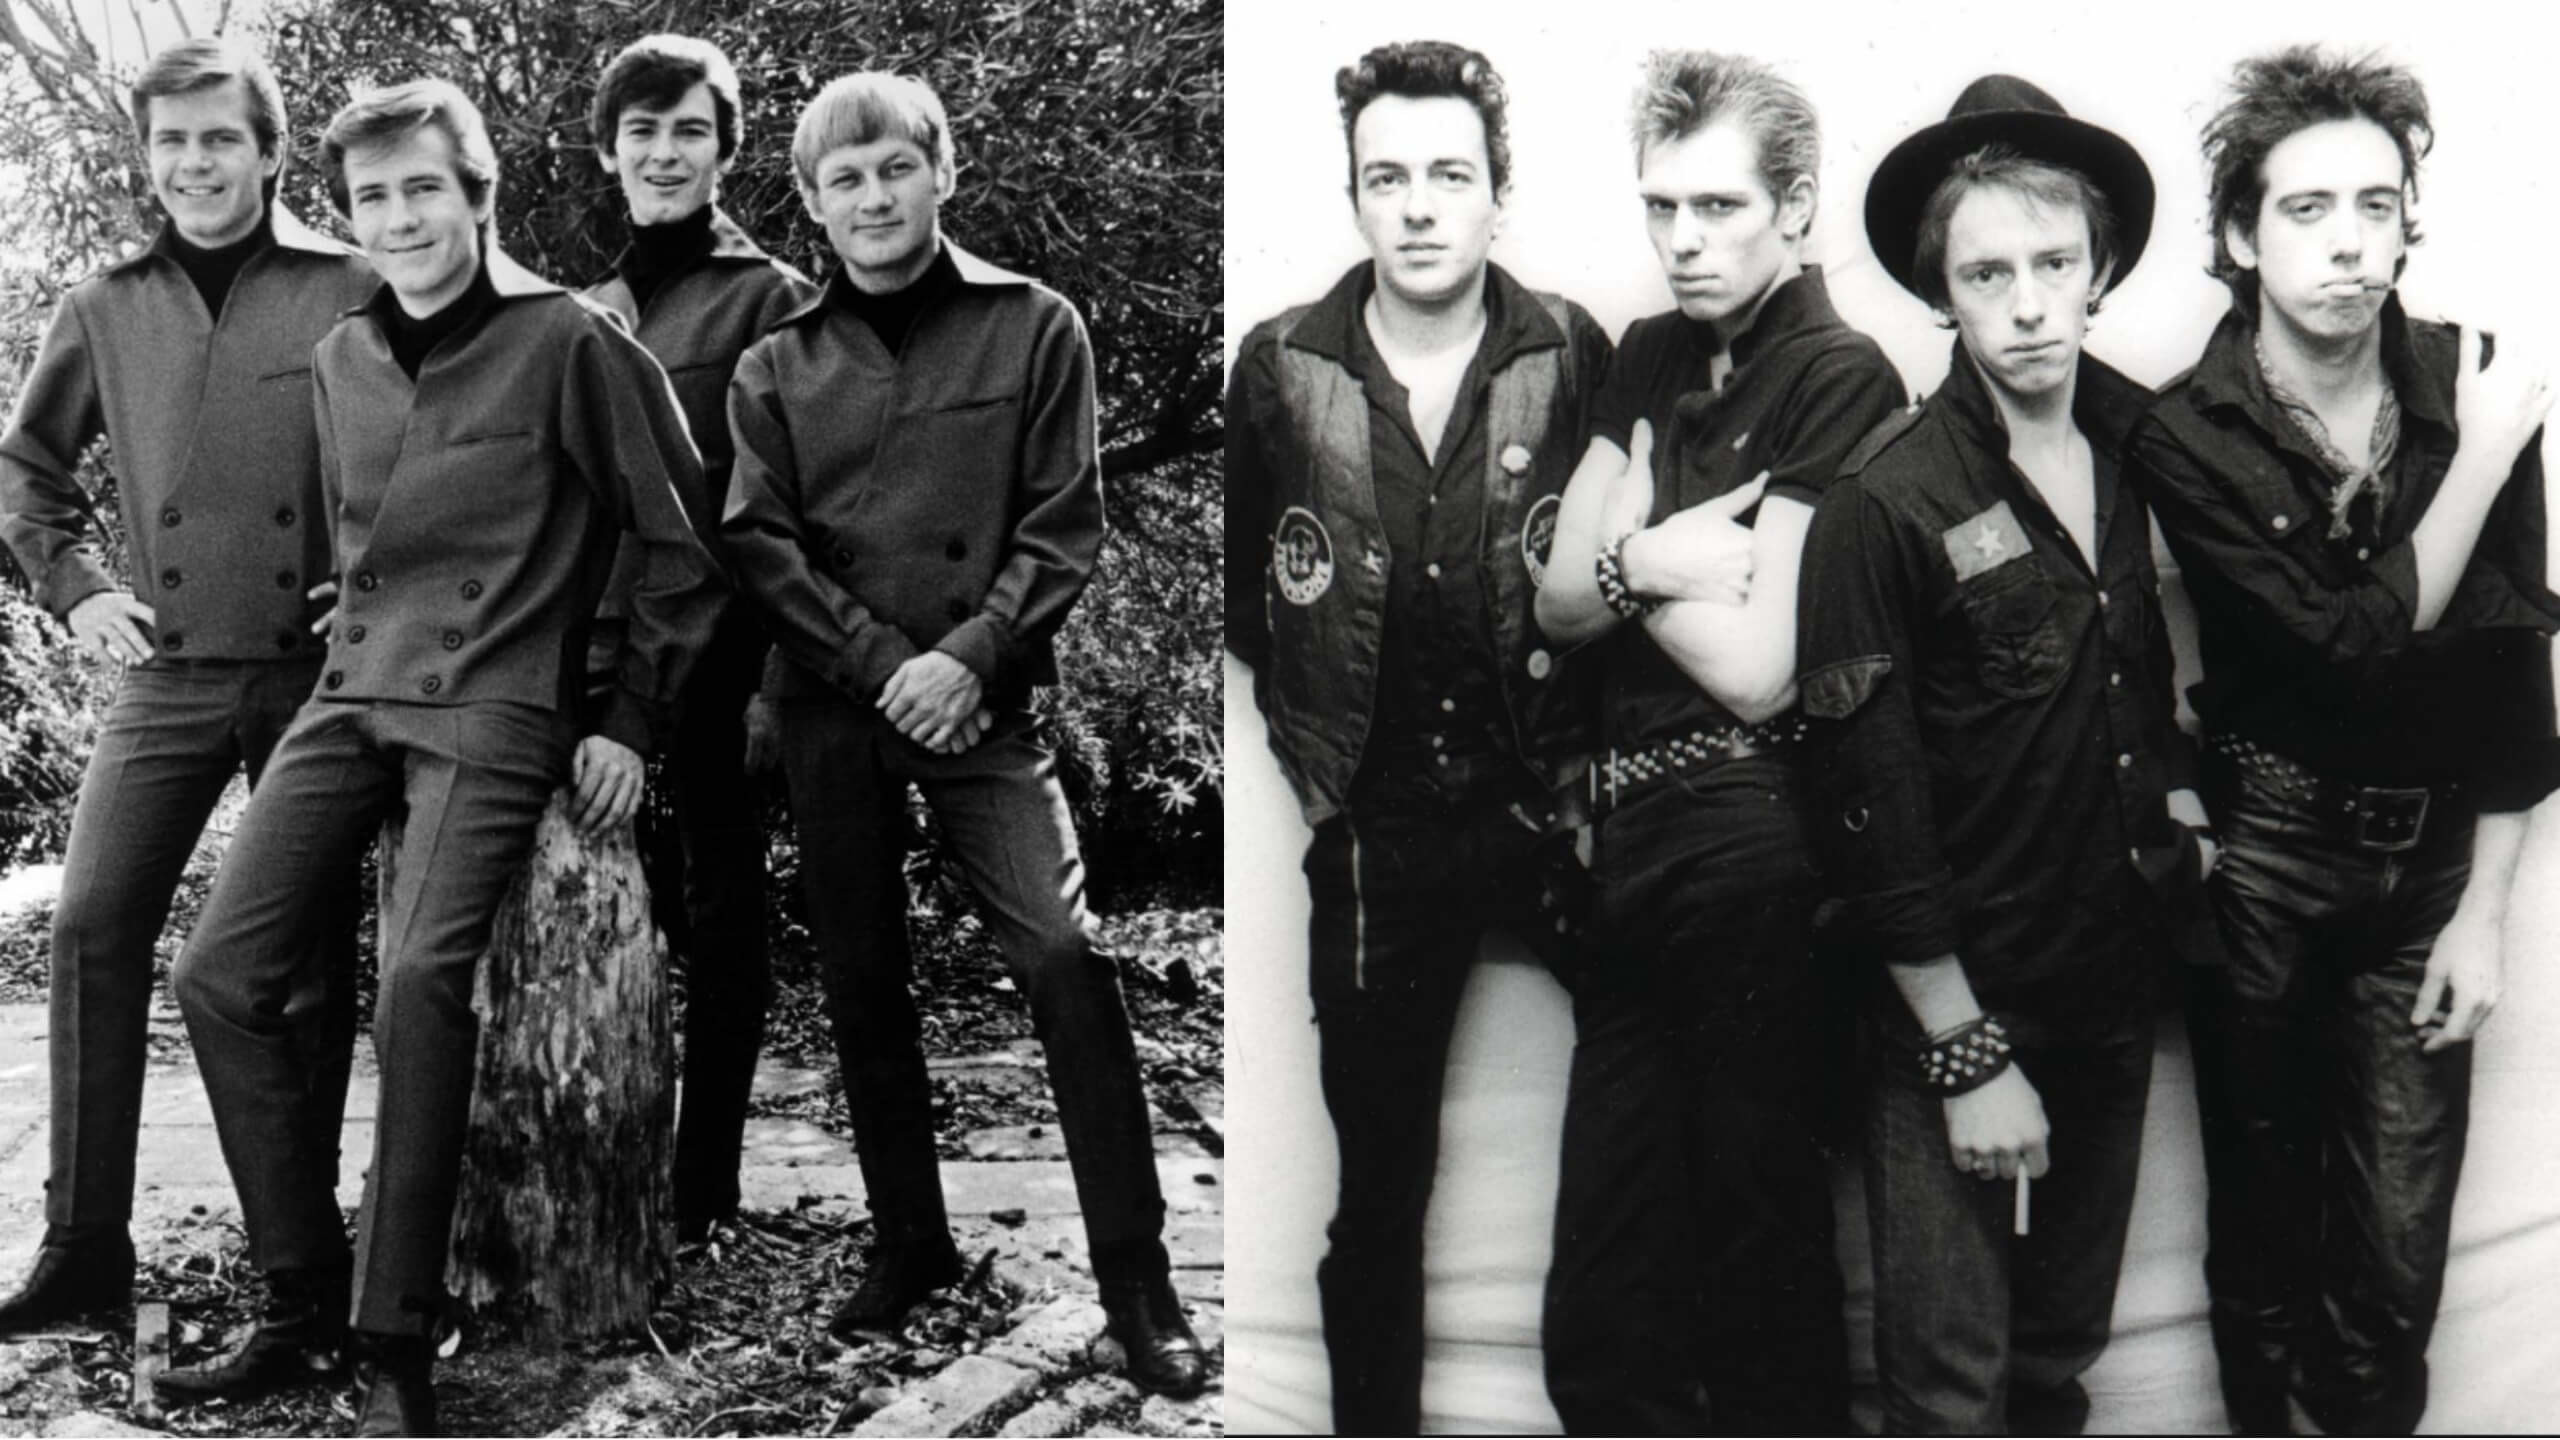 2560x1440 Bobby Fuller and The Clash